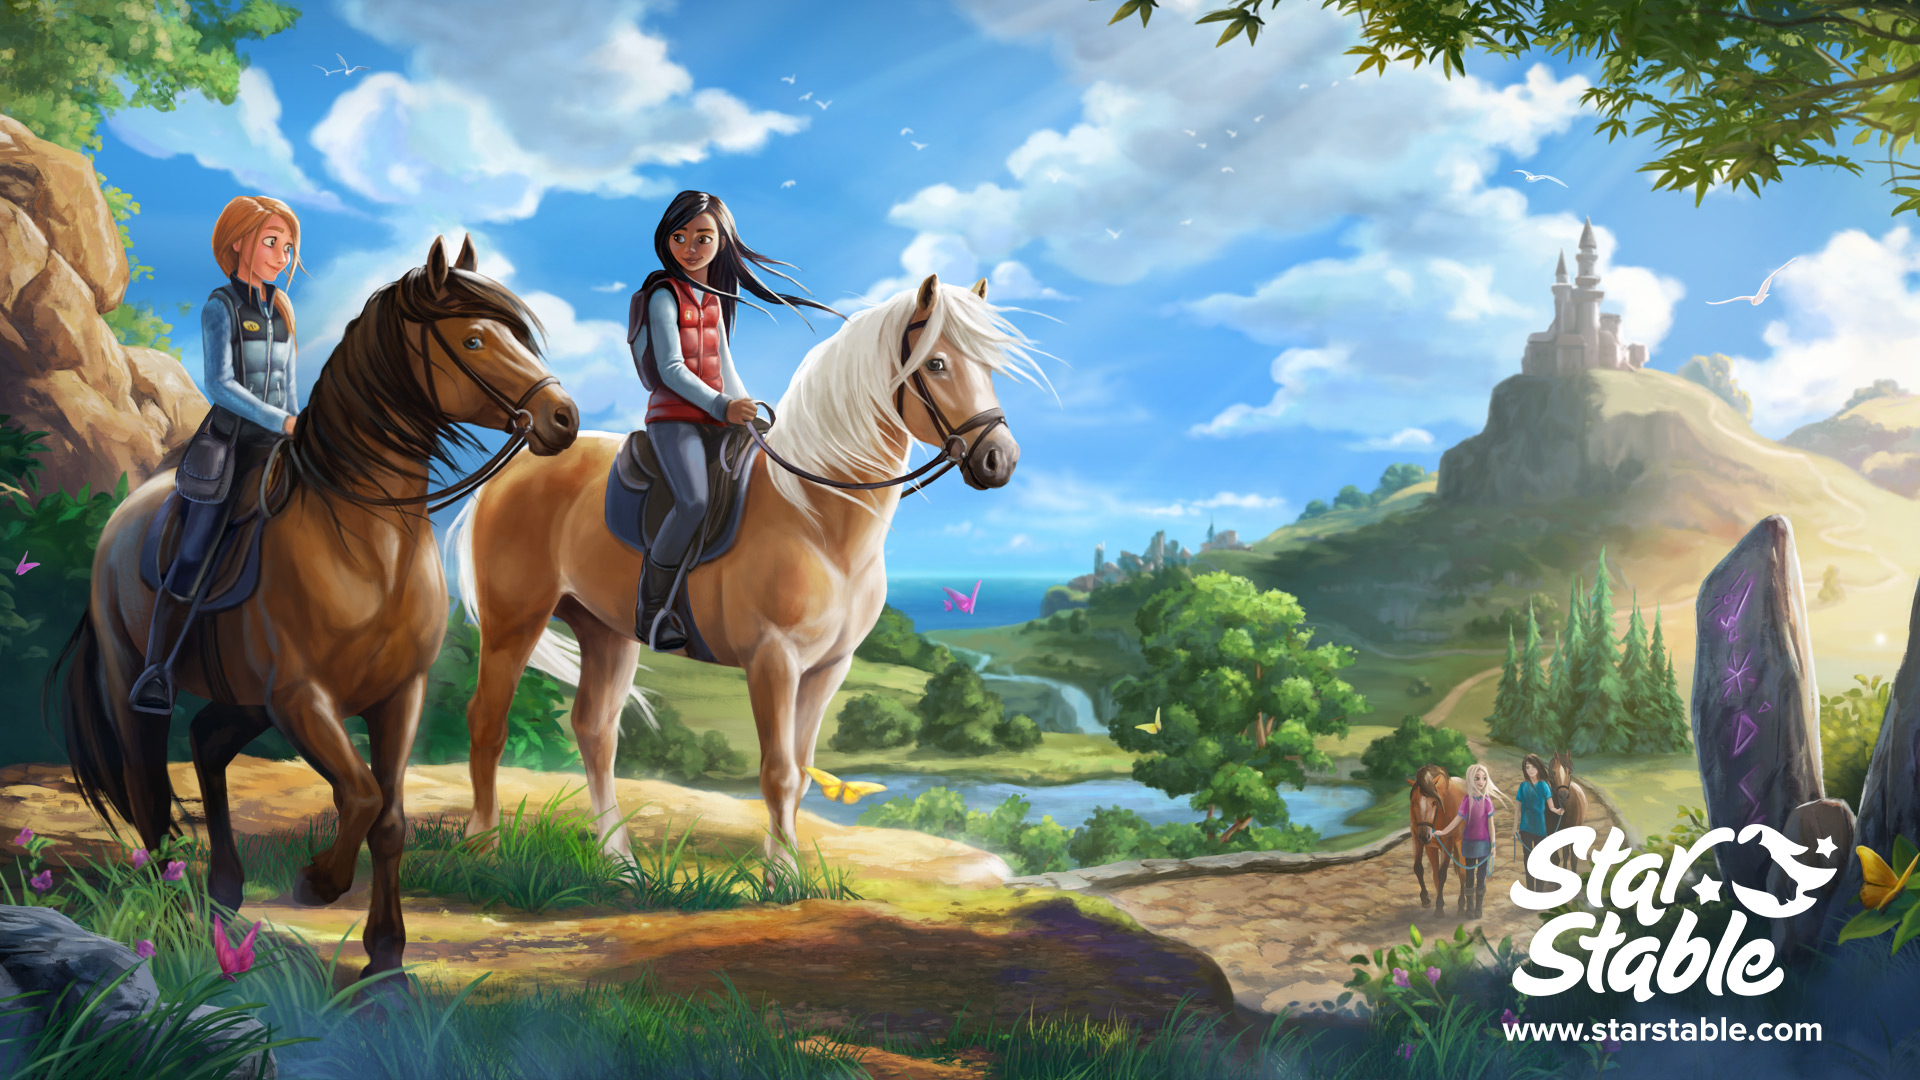 Download Free Fan Art Resources Star Stable